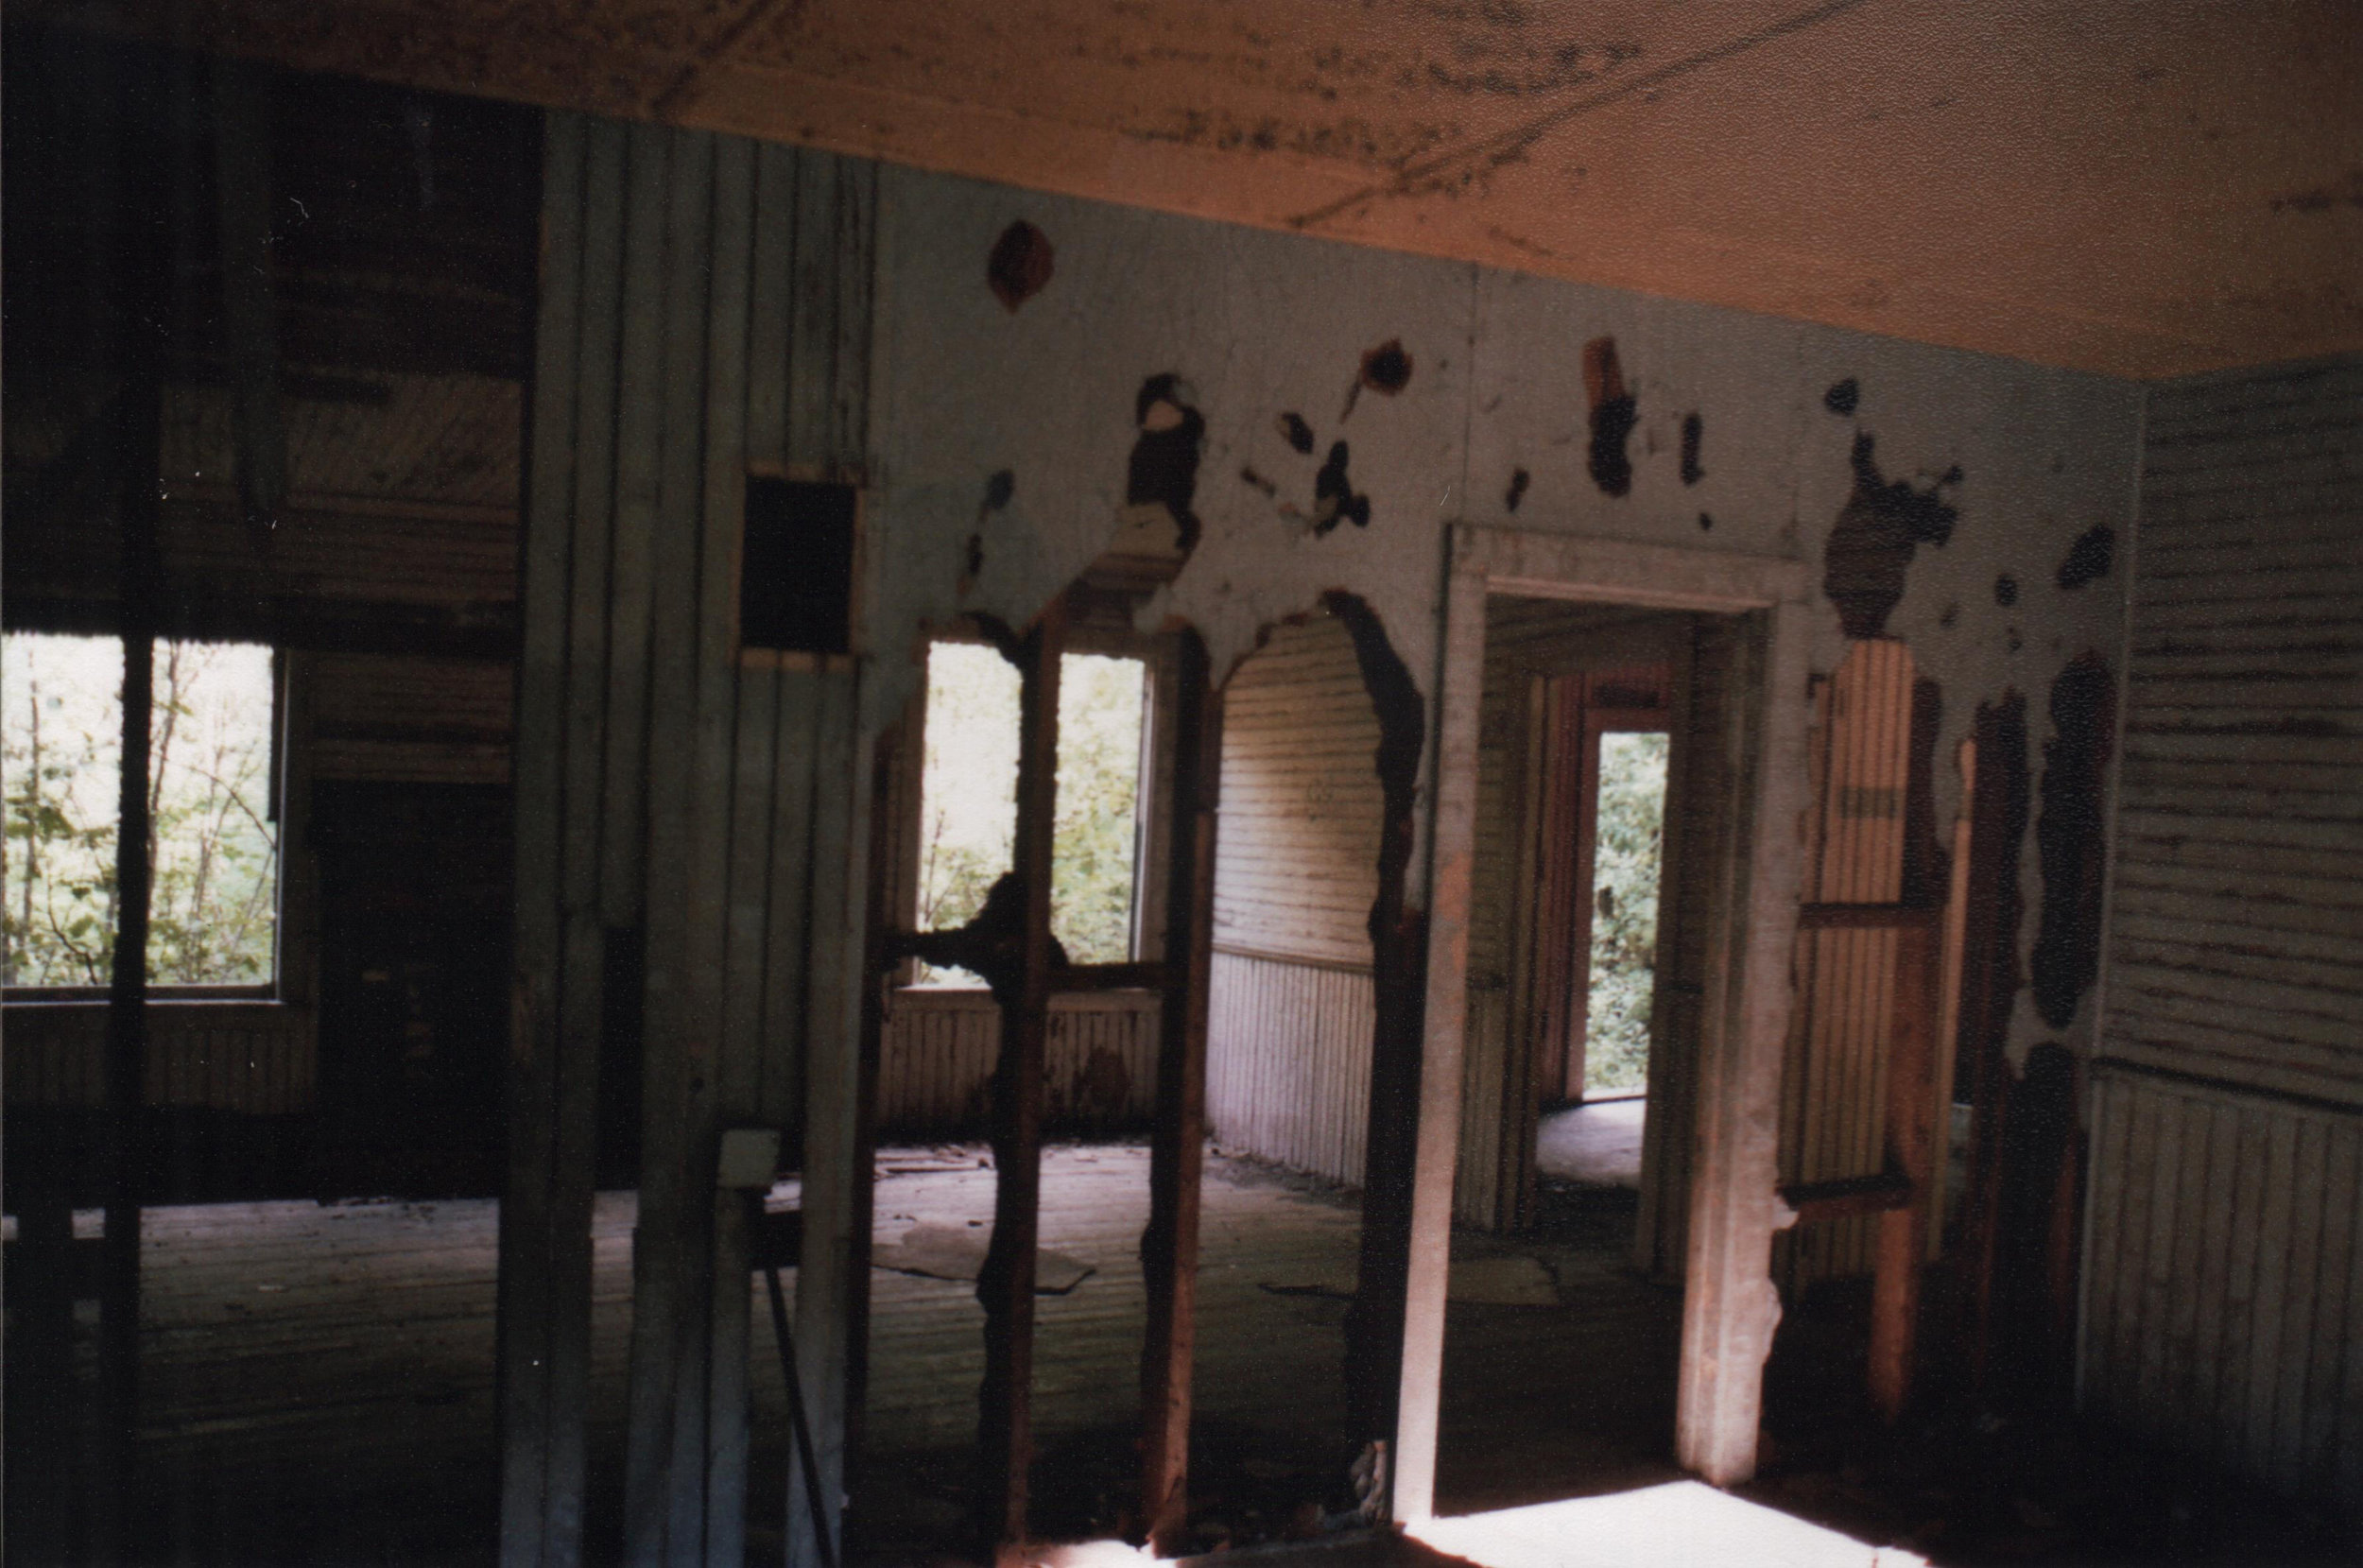 Demolition – The plaster was mostly gone, exposing the lath and studs beneath